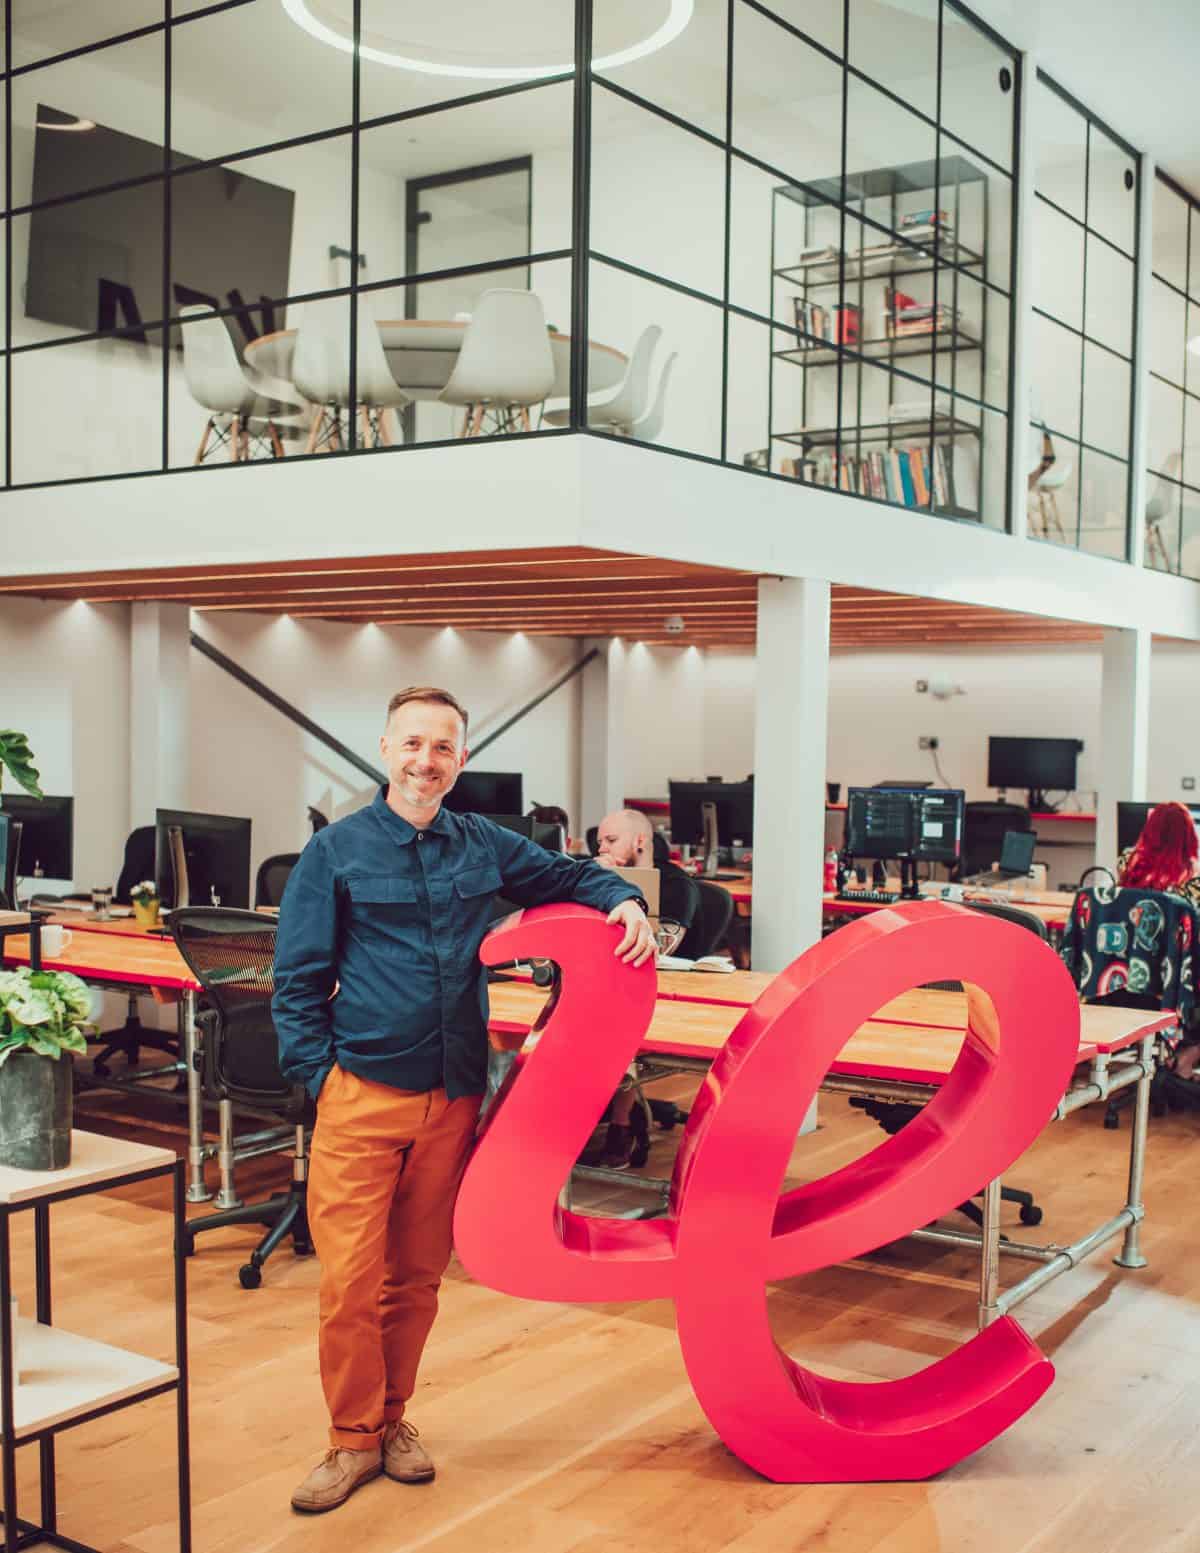 Ollie Leggett, Founder and Managing Director of IE Brand & Digital, in the agency's new studio space